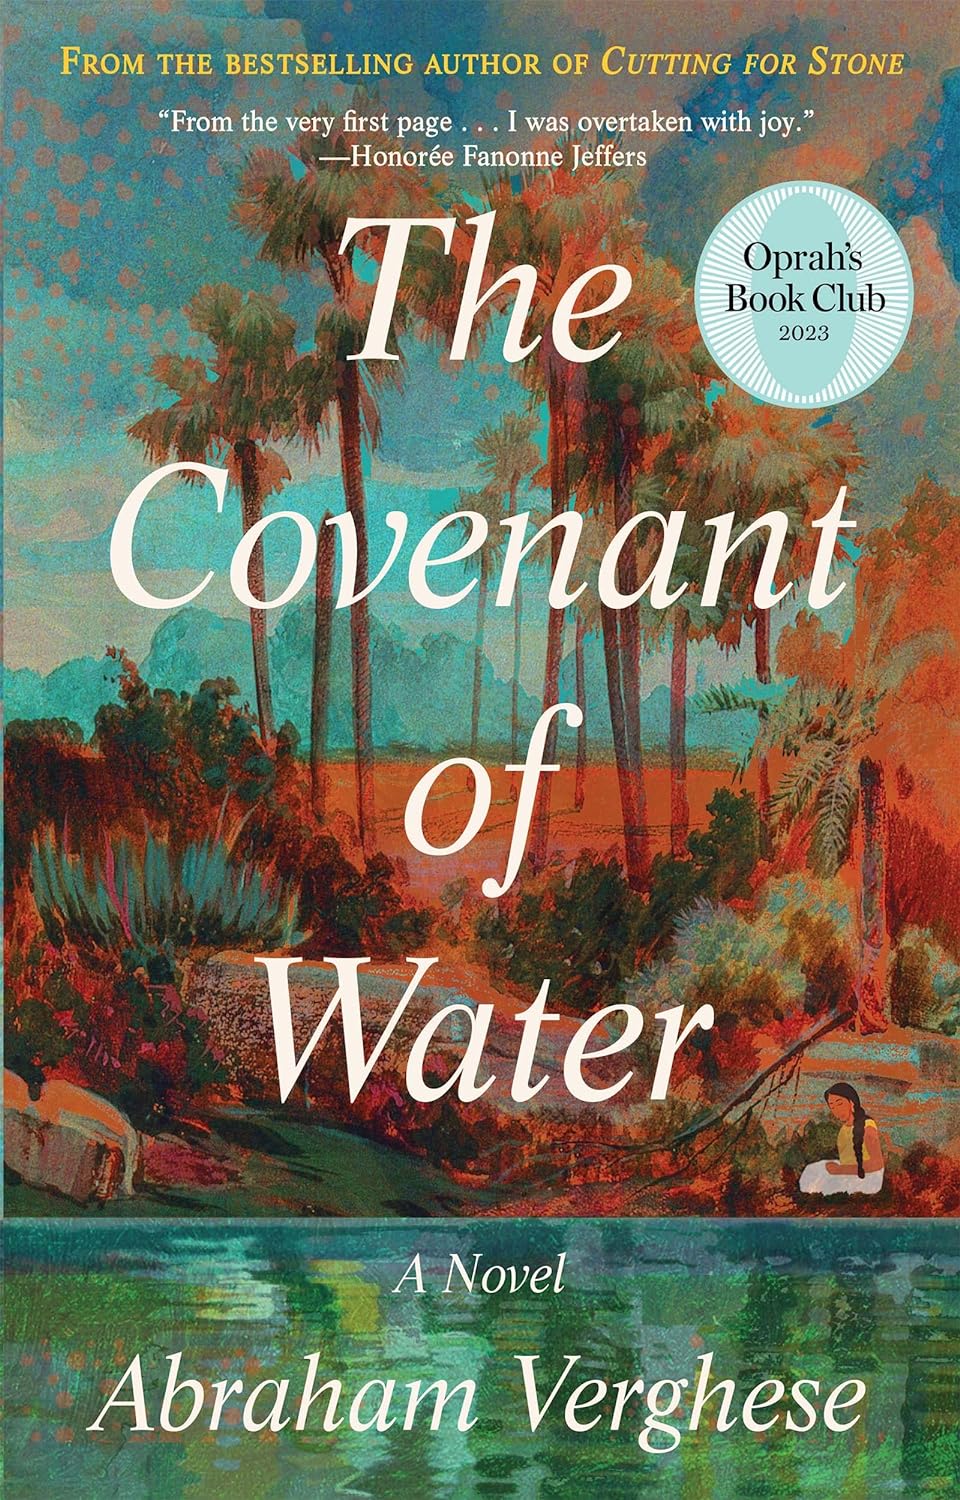 Book cover: "The Covenant of Water."